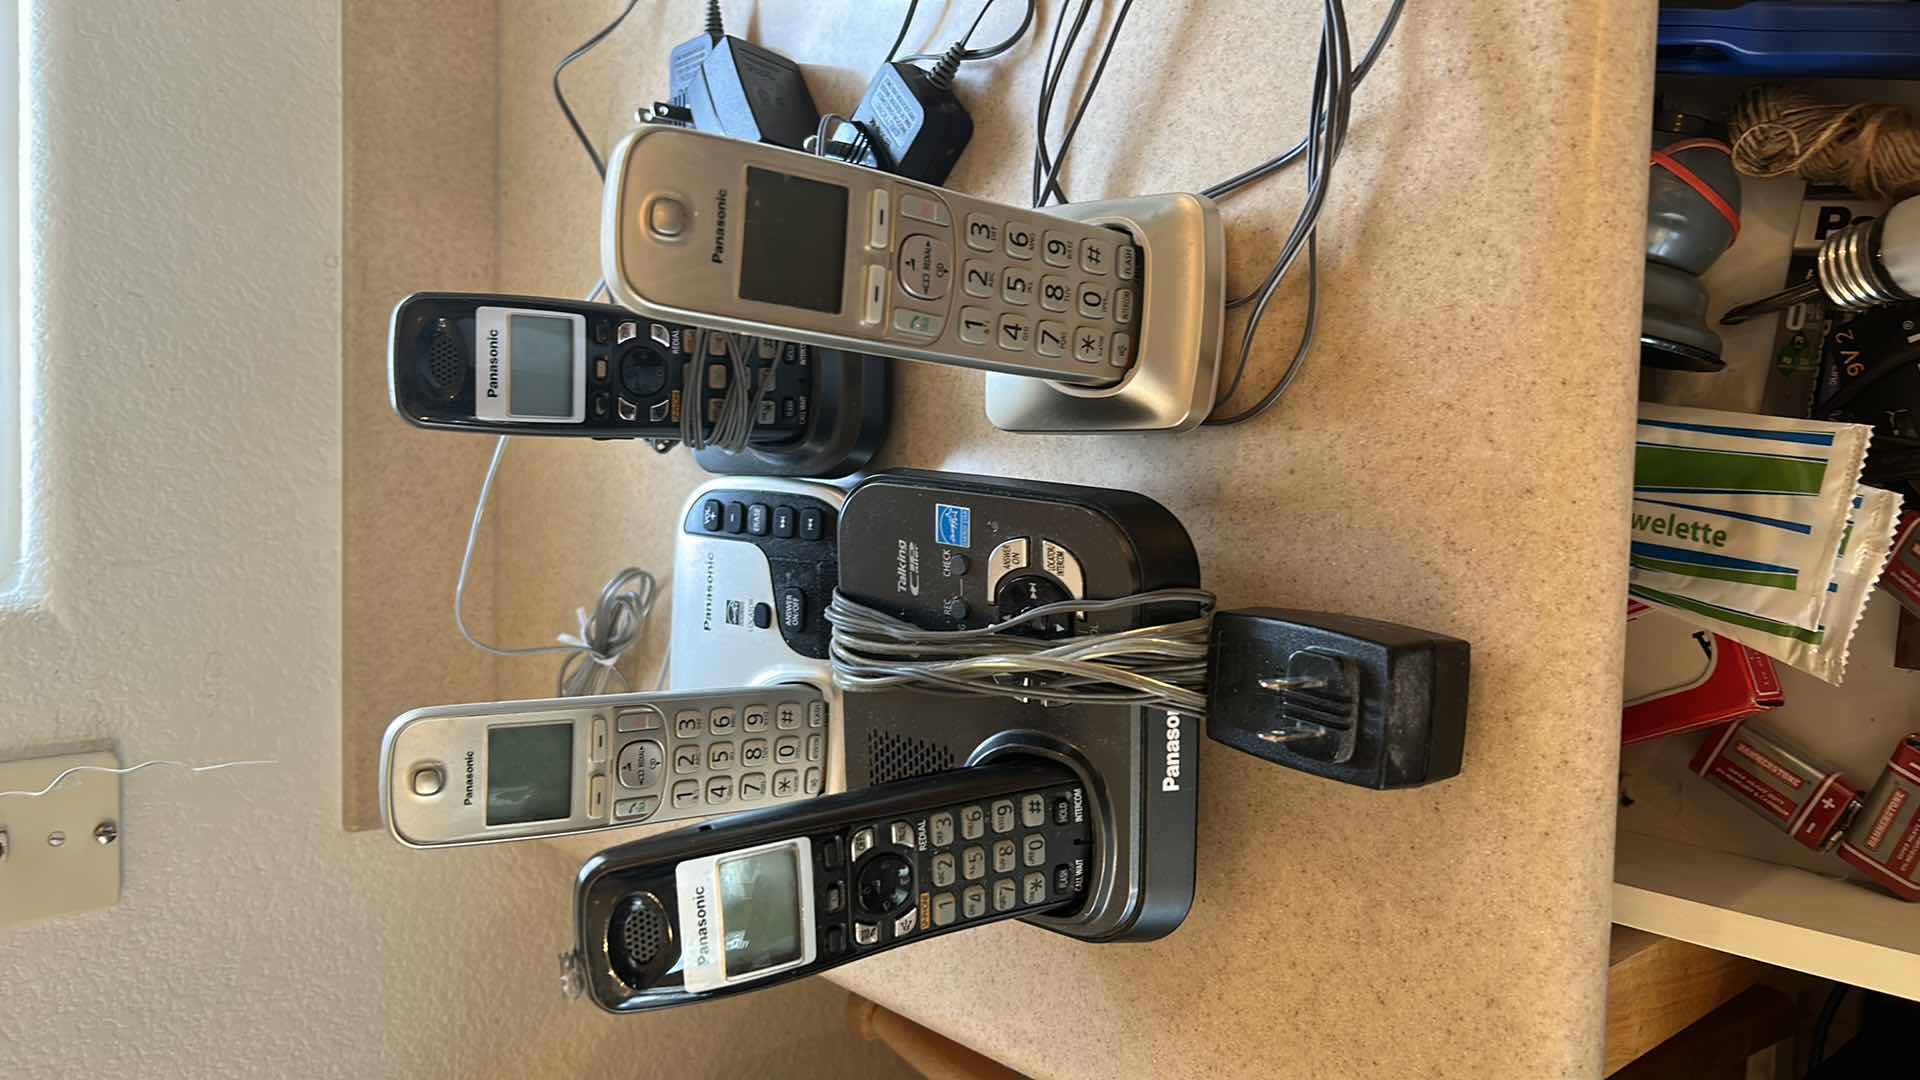 Photo 2 of 4 PHONES AND CONTENTS OF DRAWER